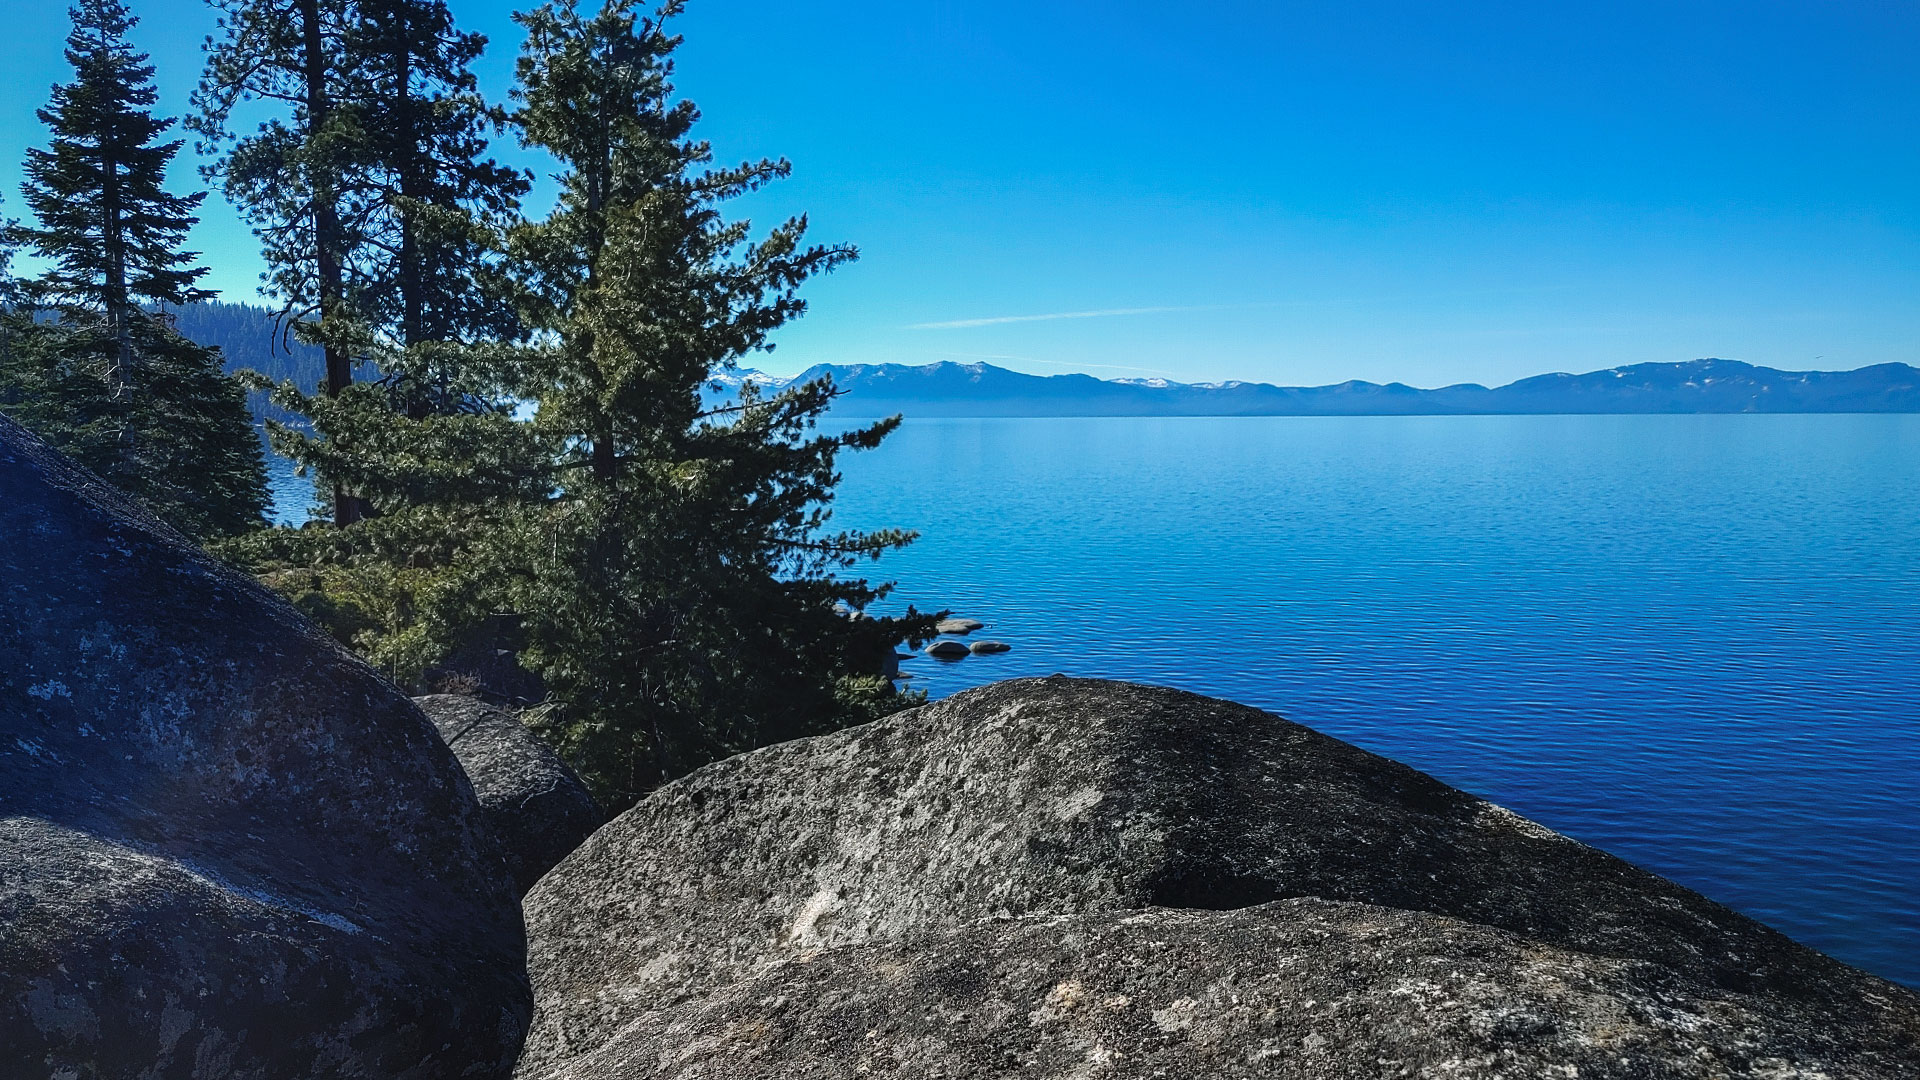 Blue skies and blue water with granite boulders and pine trees in the foreground